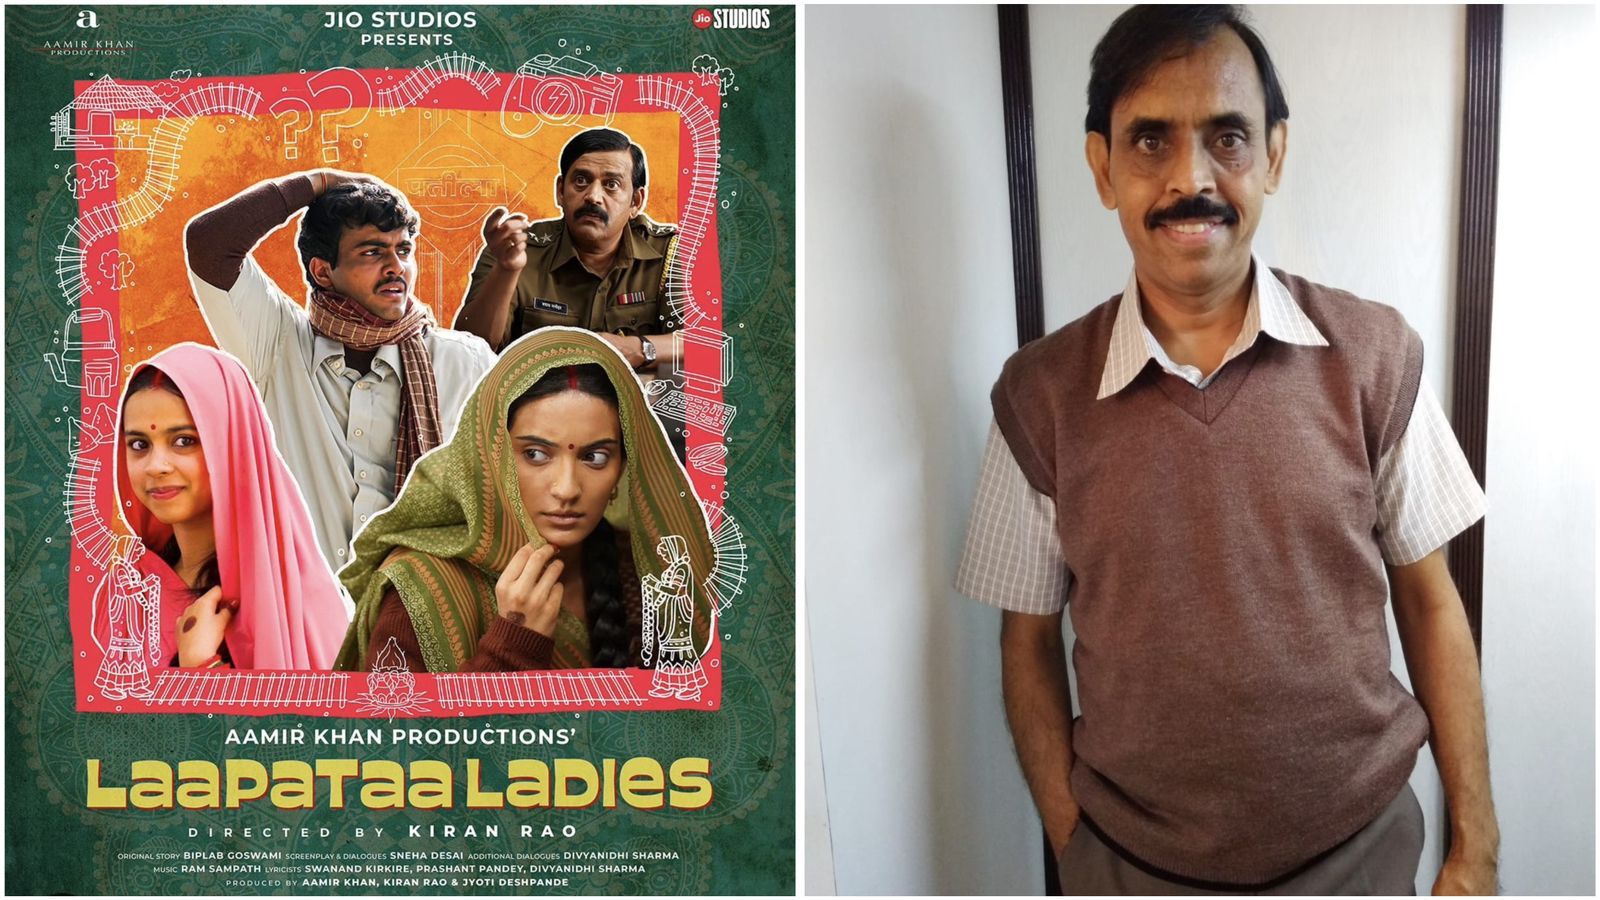 ‘Laapataa Ladies’ actor Narendra Khatri to share screen space with Aamir Khan in a new project!